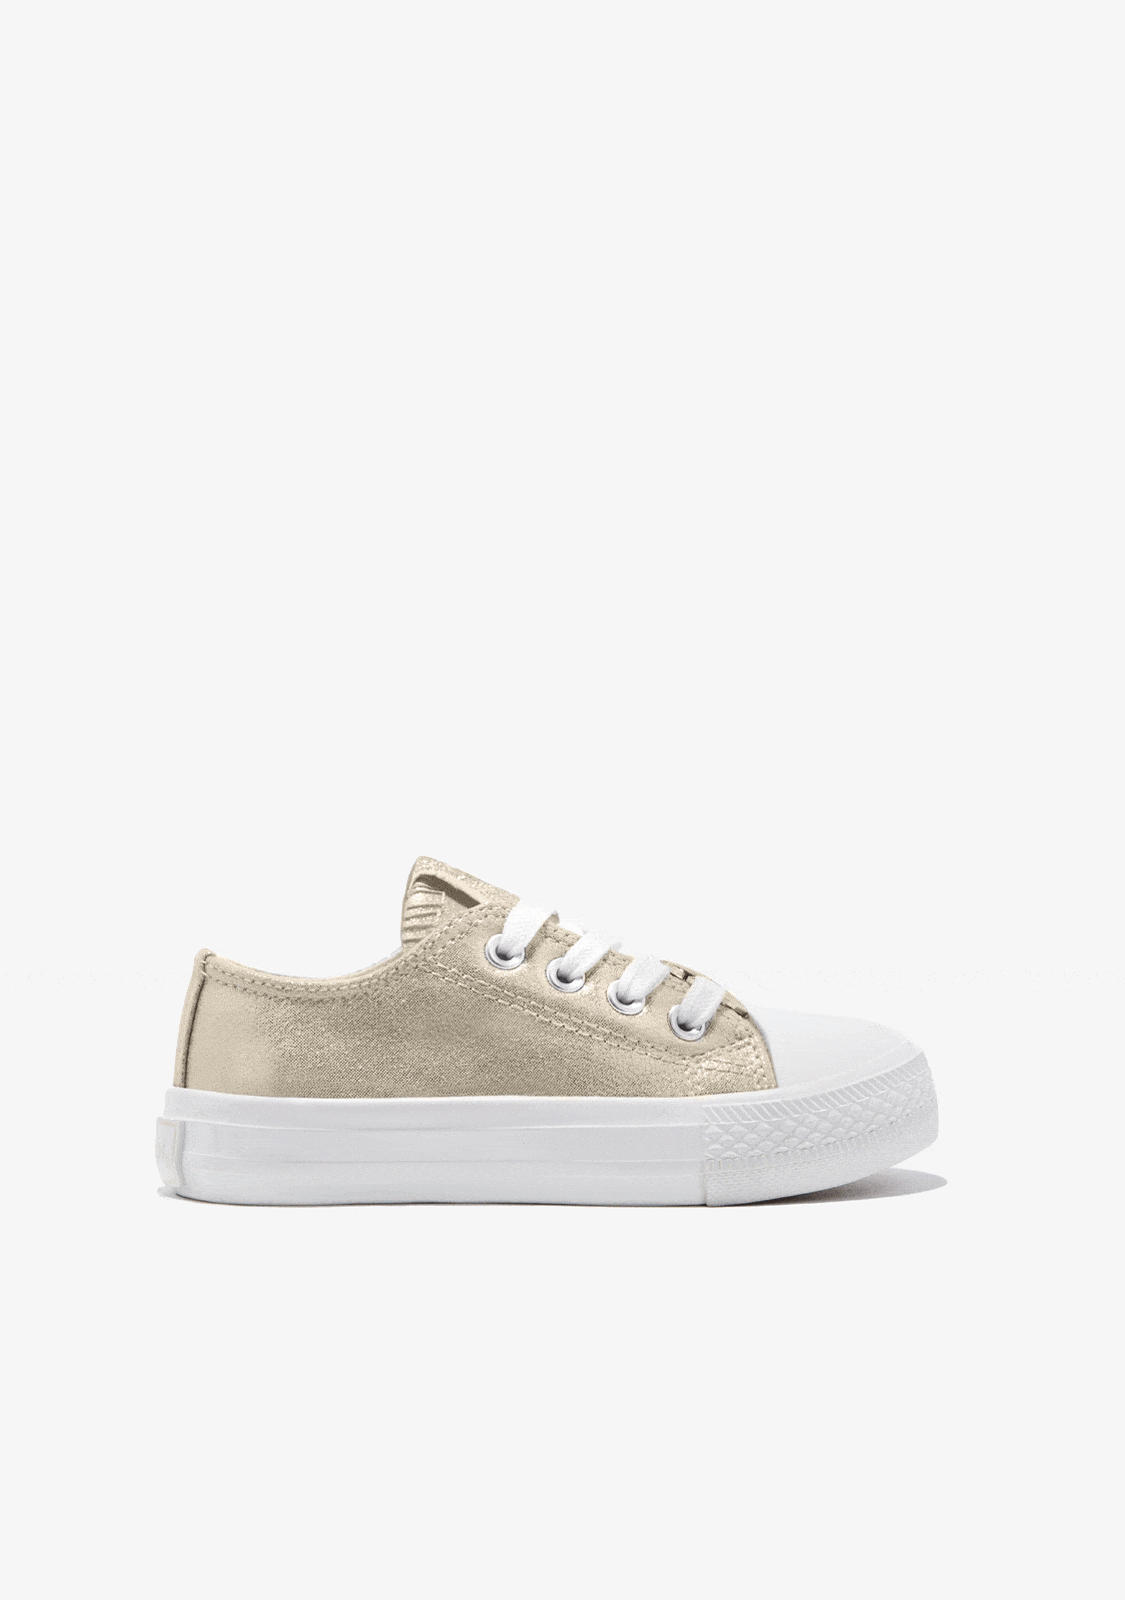 Conguitos BASKET Gold Heart Metallized Canvas Sneakers